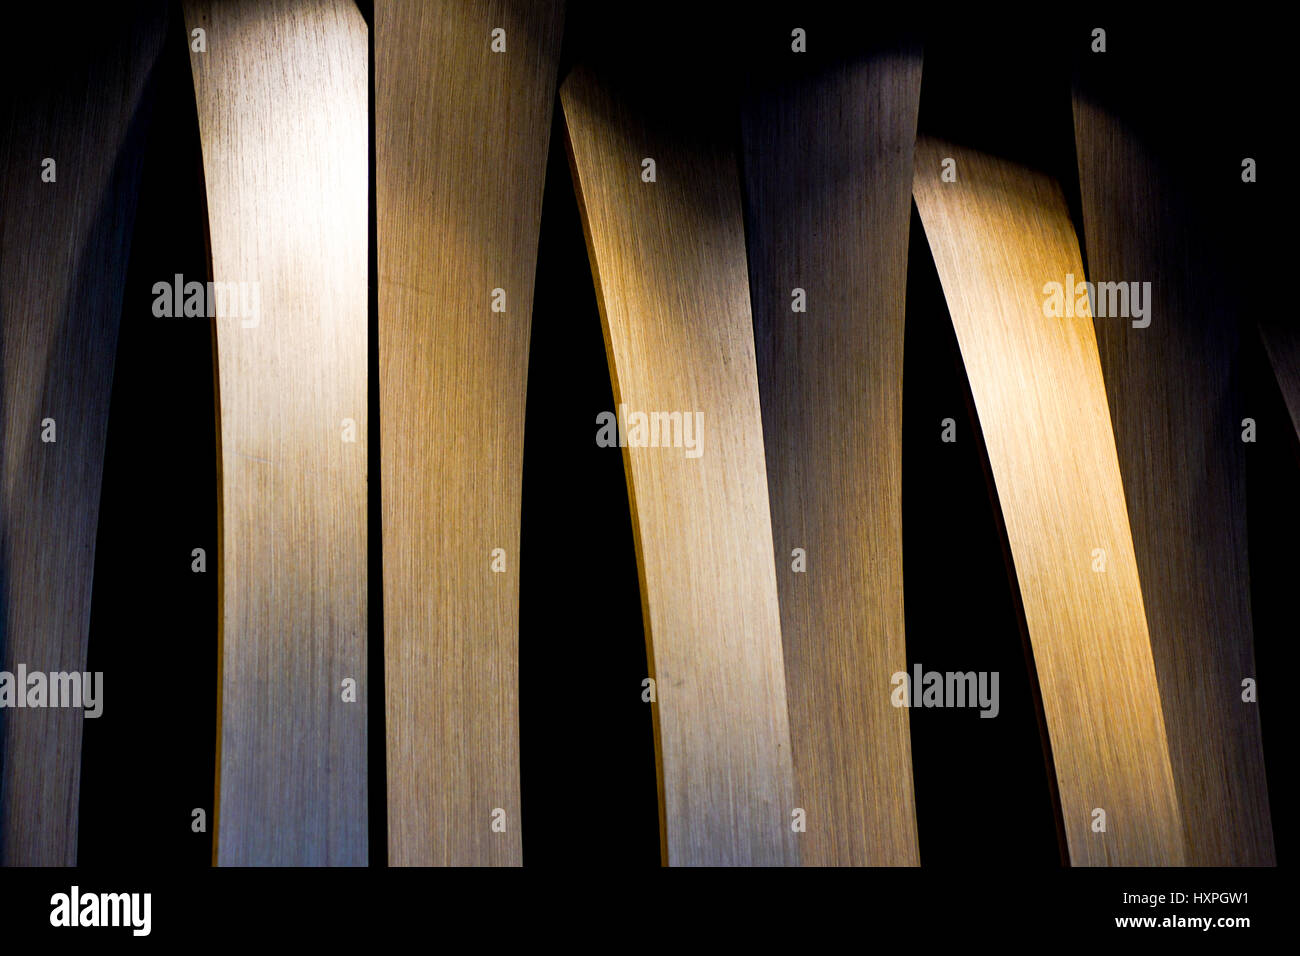 Grunge interior photo of wood wall with lateral lighting from led light . Abstract architecture image in classic style with contrast Stock Photo